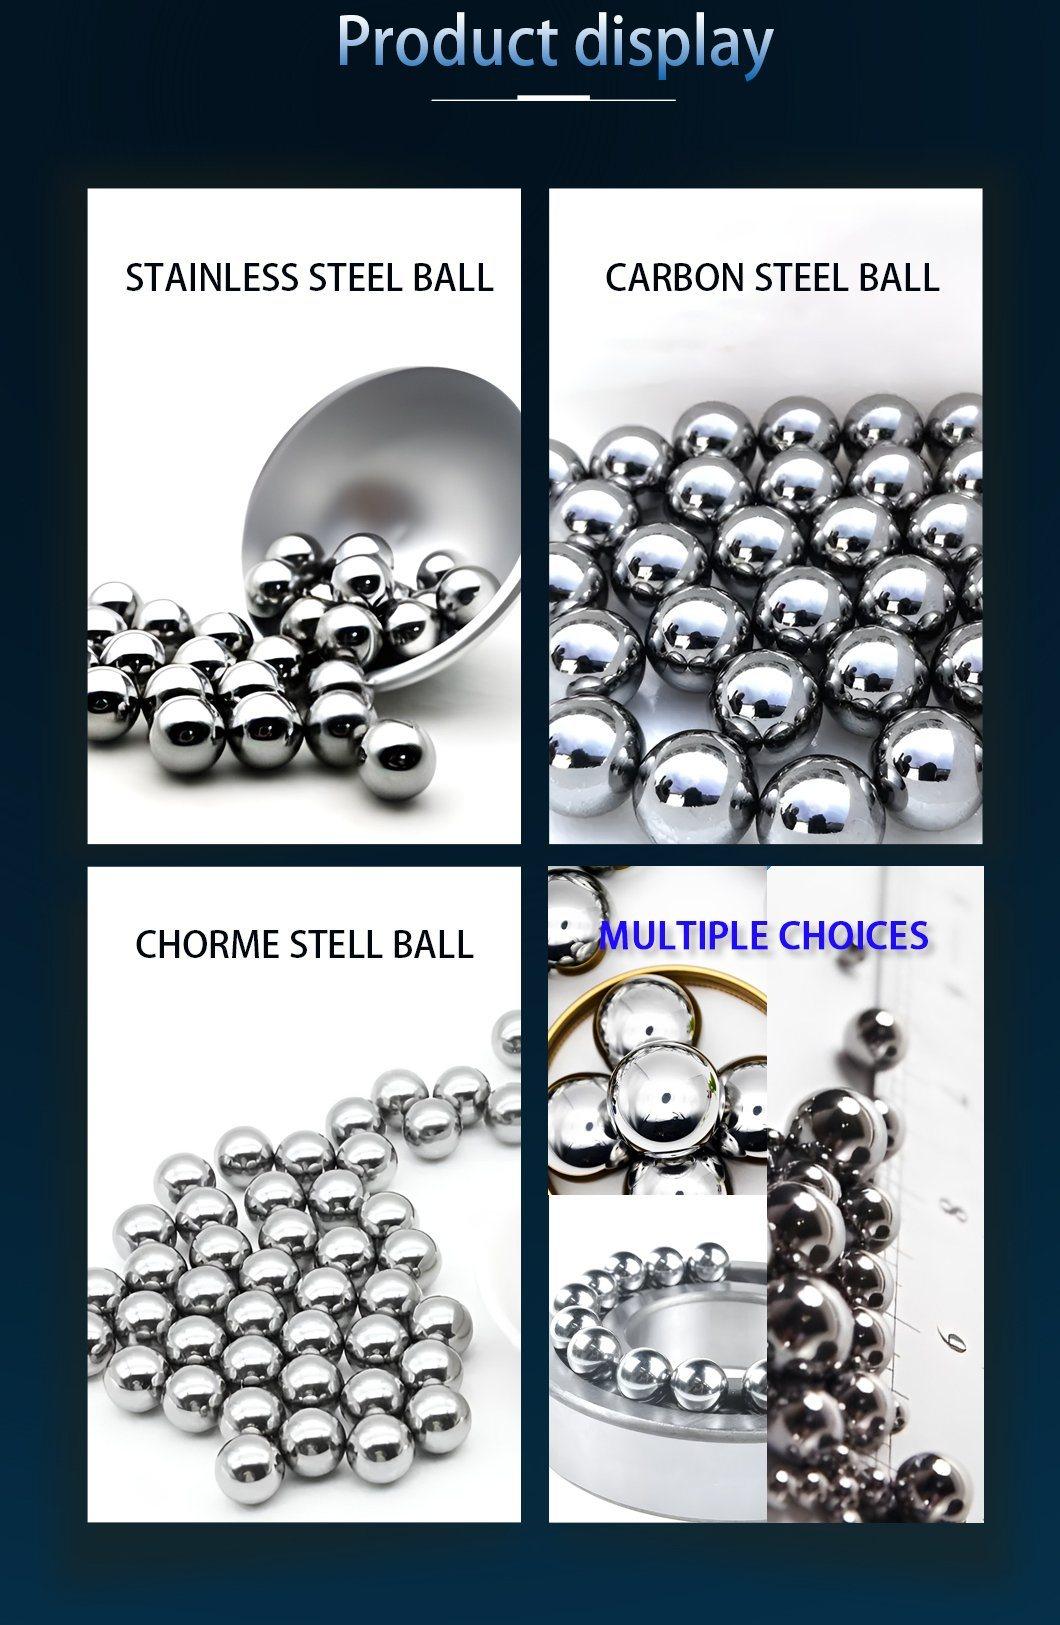 Chrome Bearing Steel Balls 2mm-25.4mm G20-G500 for Ball Bearing /Auto/Motorcycle /Bicycle Parts/Guide Rail